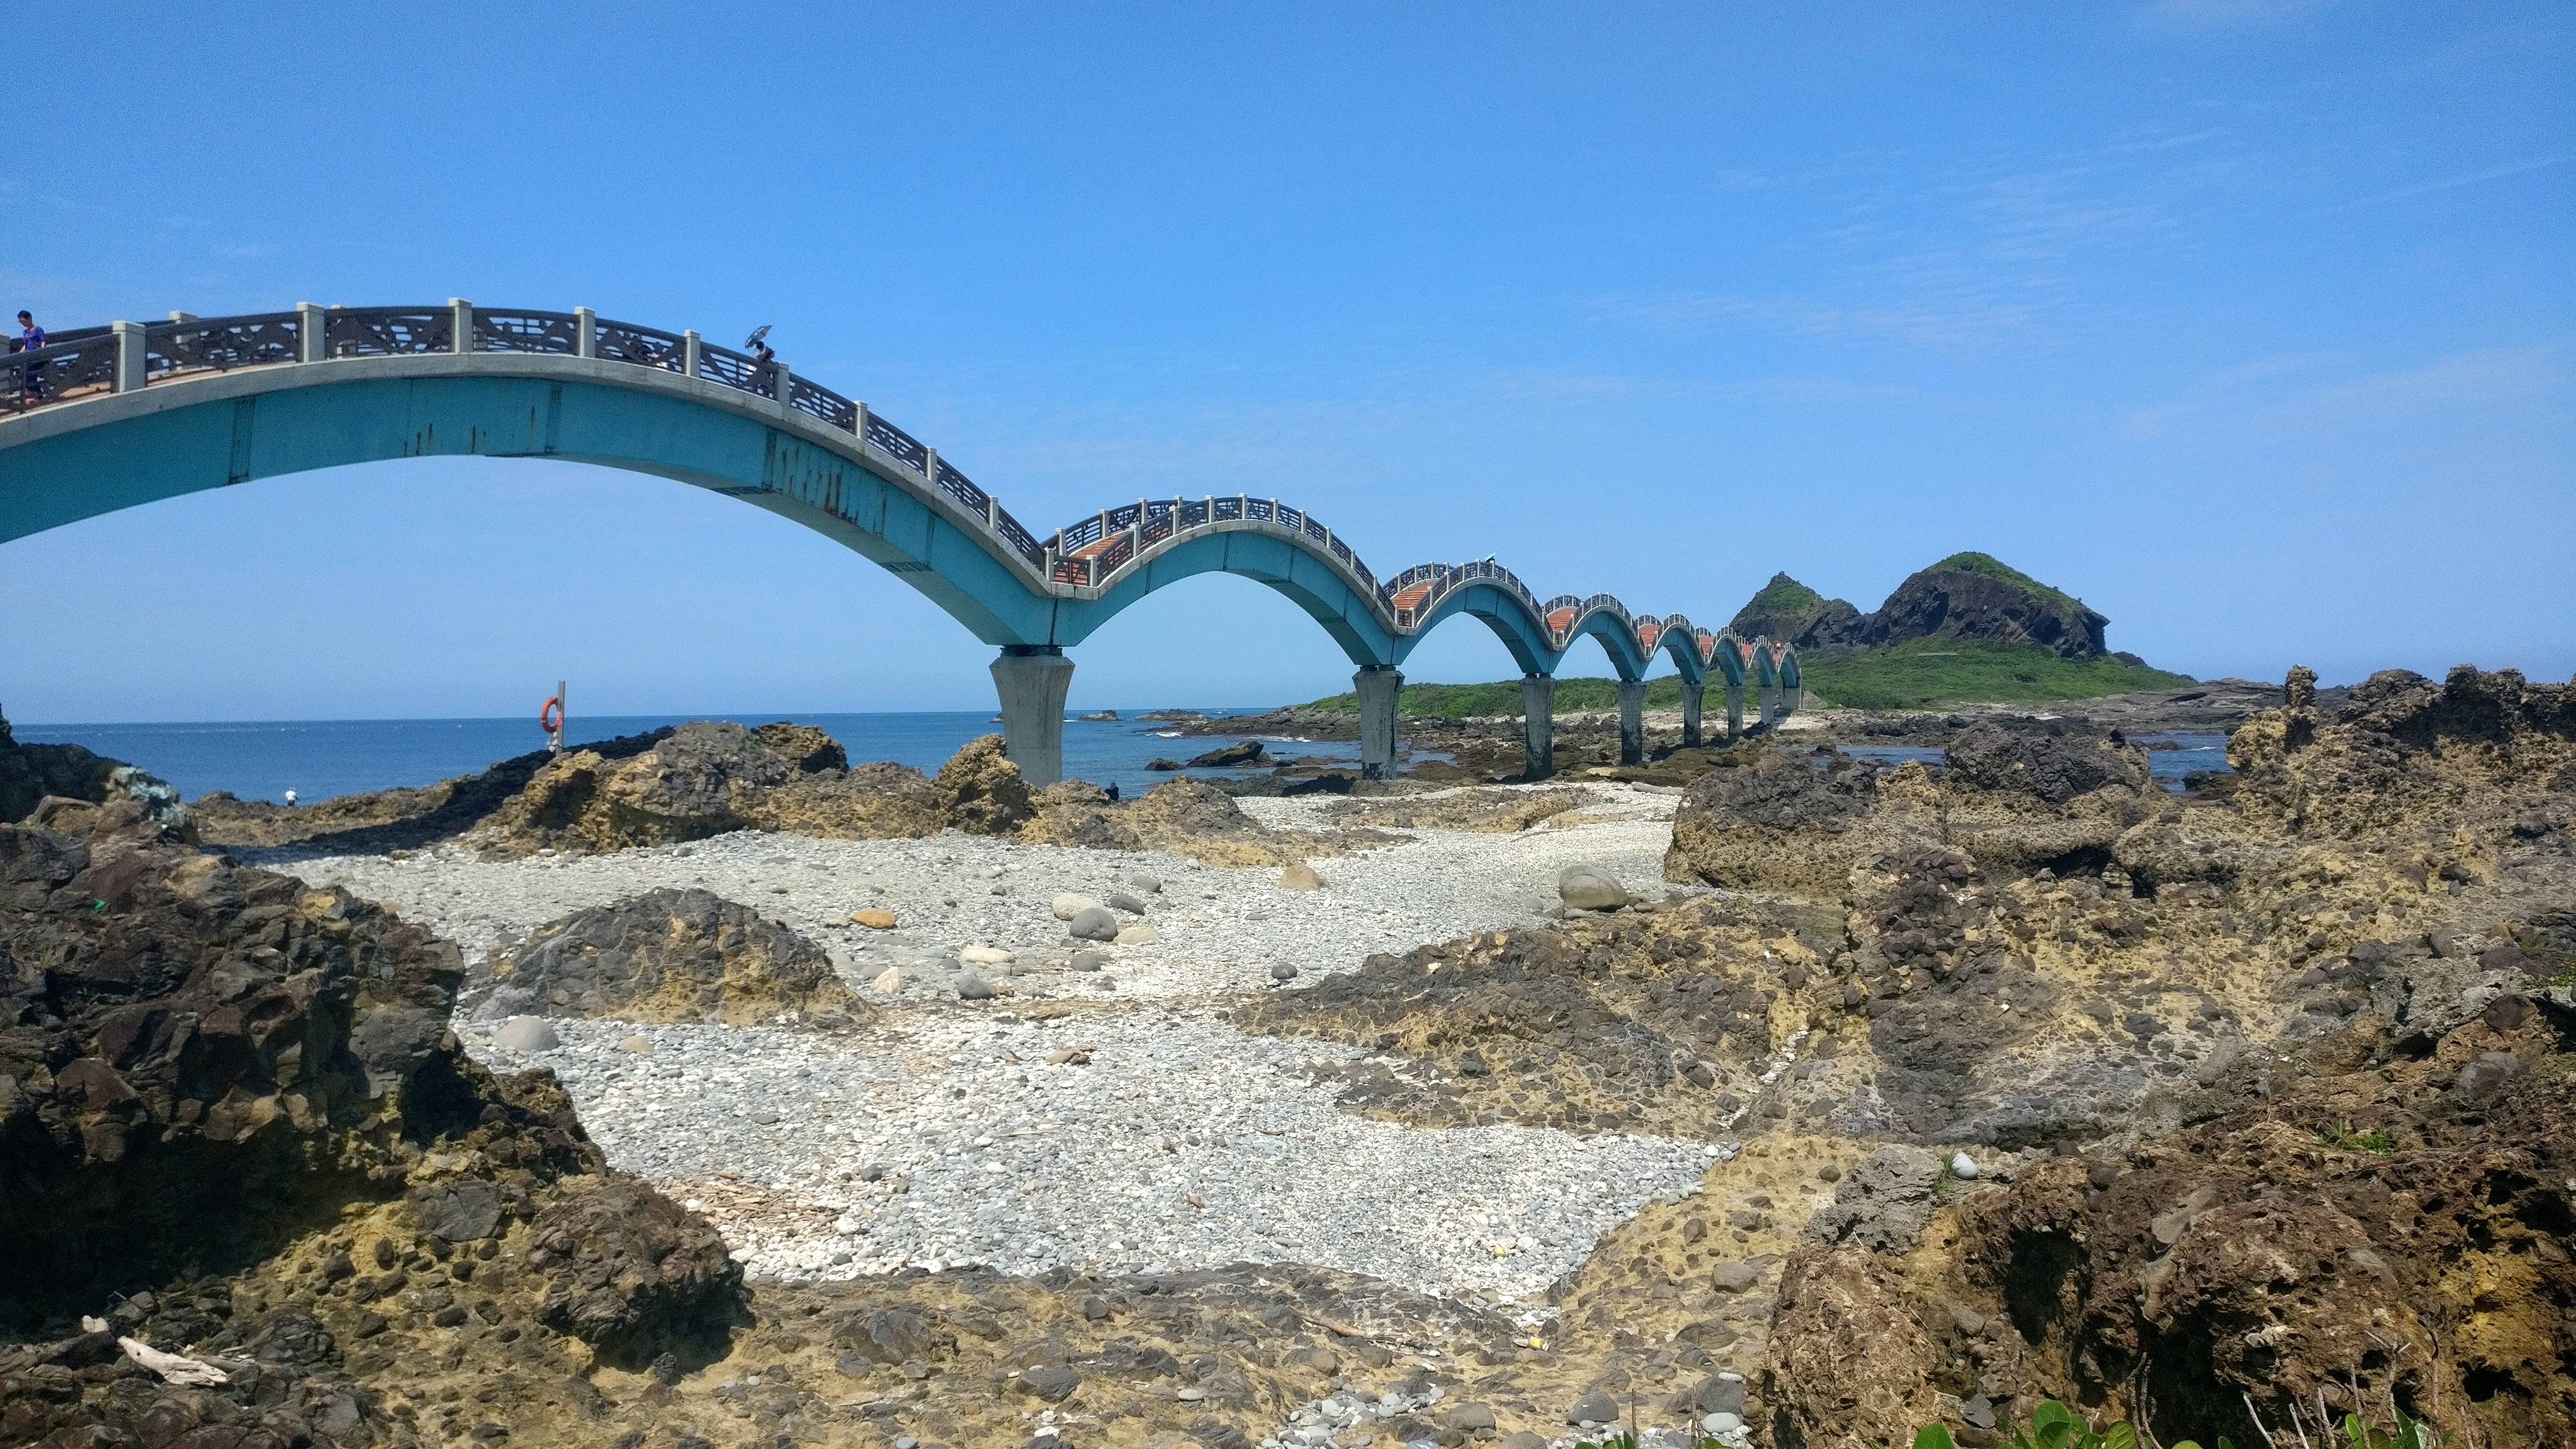 Road trip from Kenting to Hualien